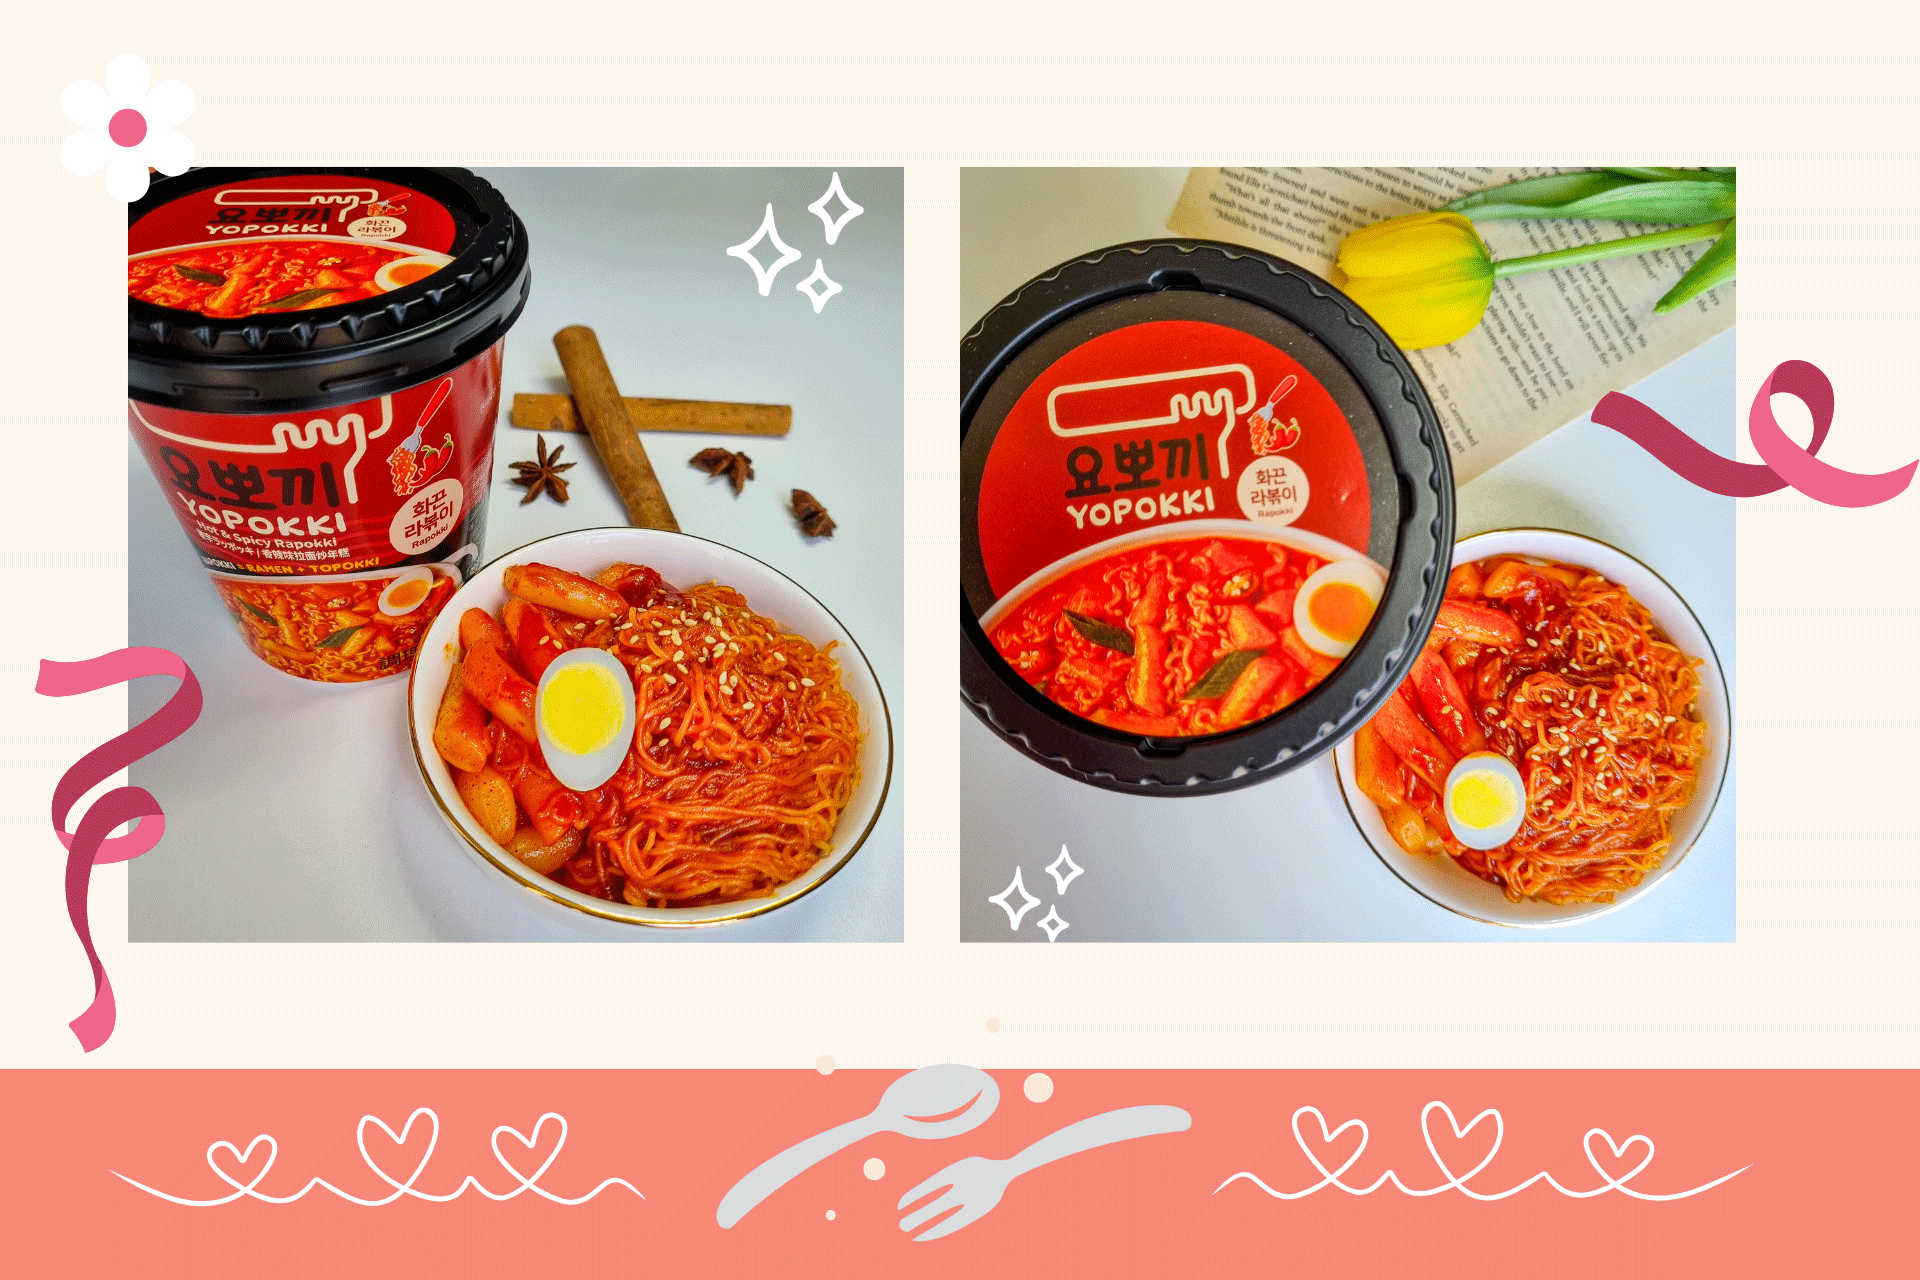 Hot and spicy cup rabokki recipe image traditional Korean food